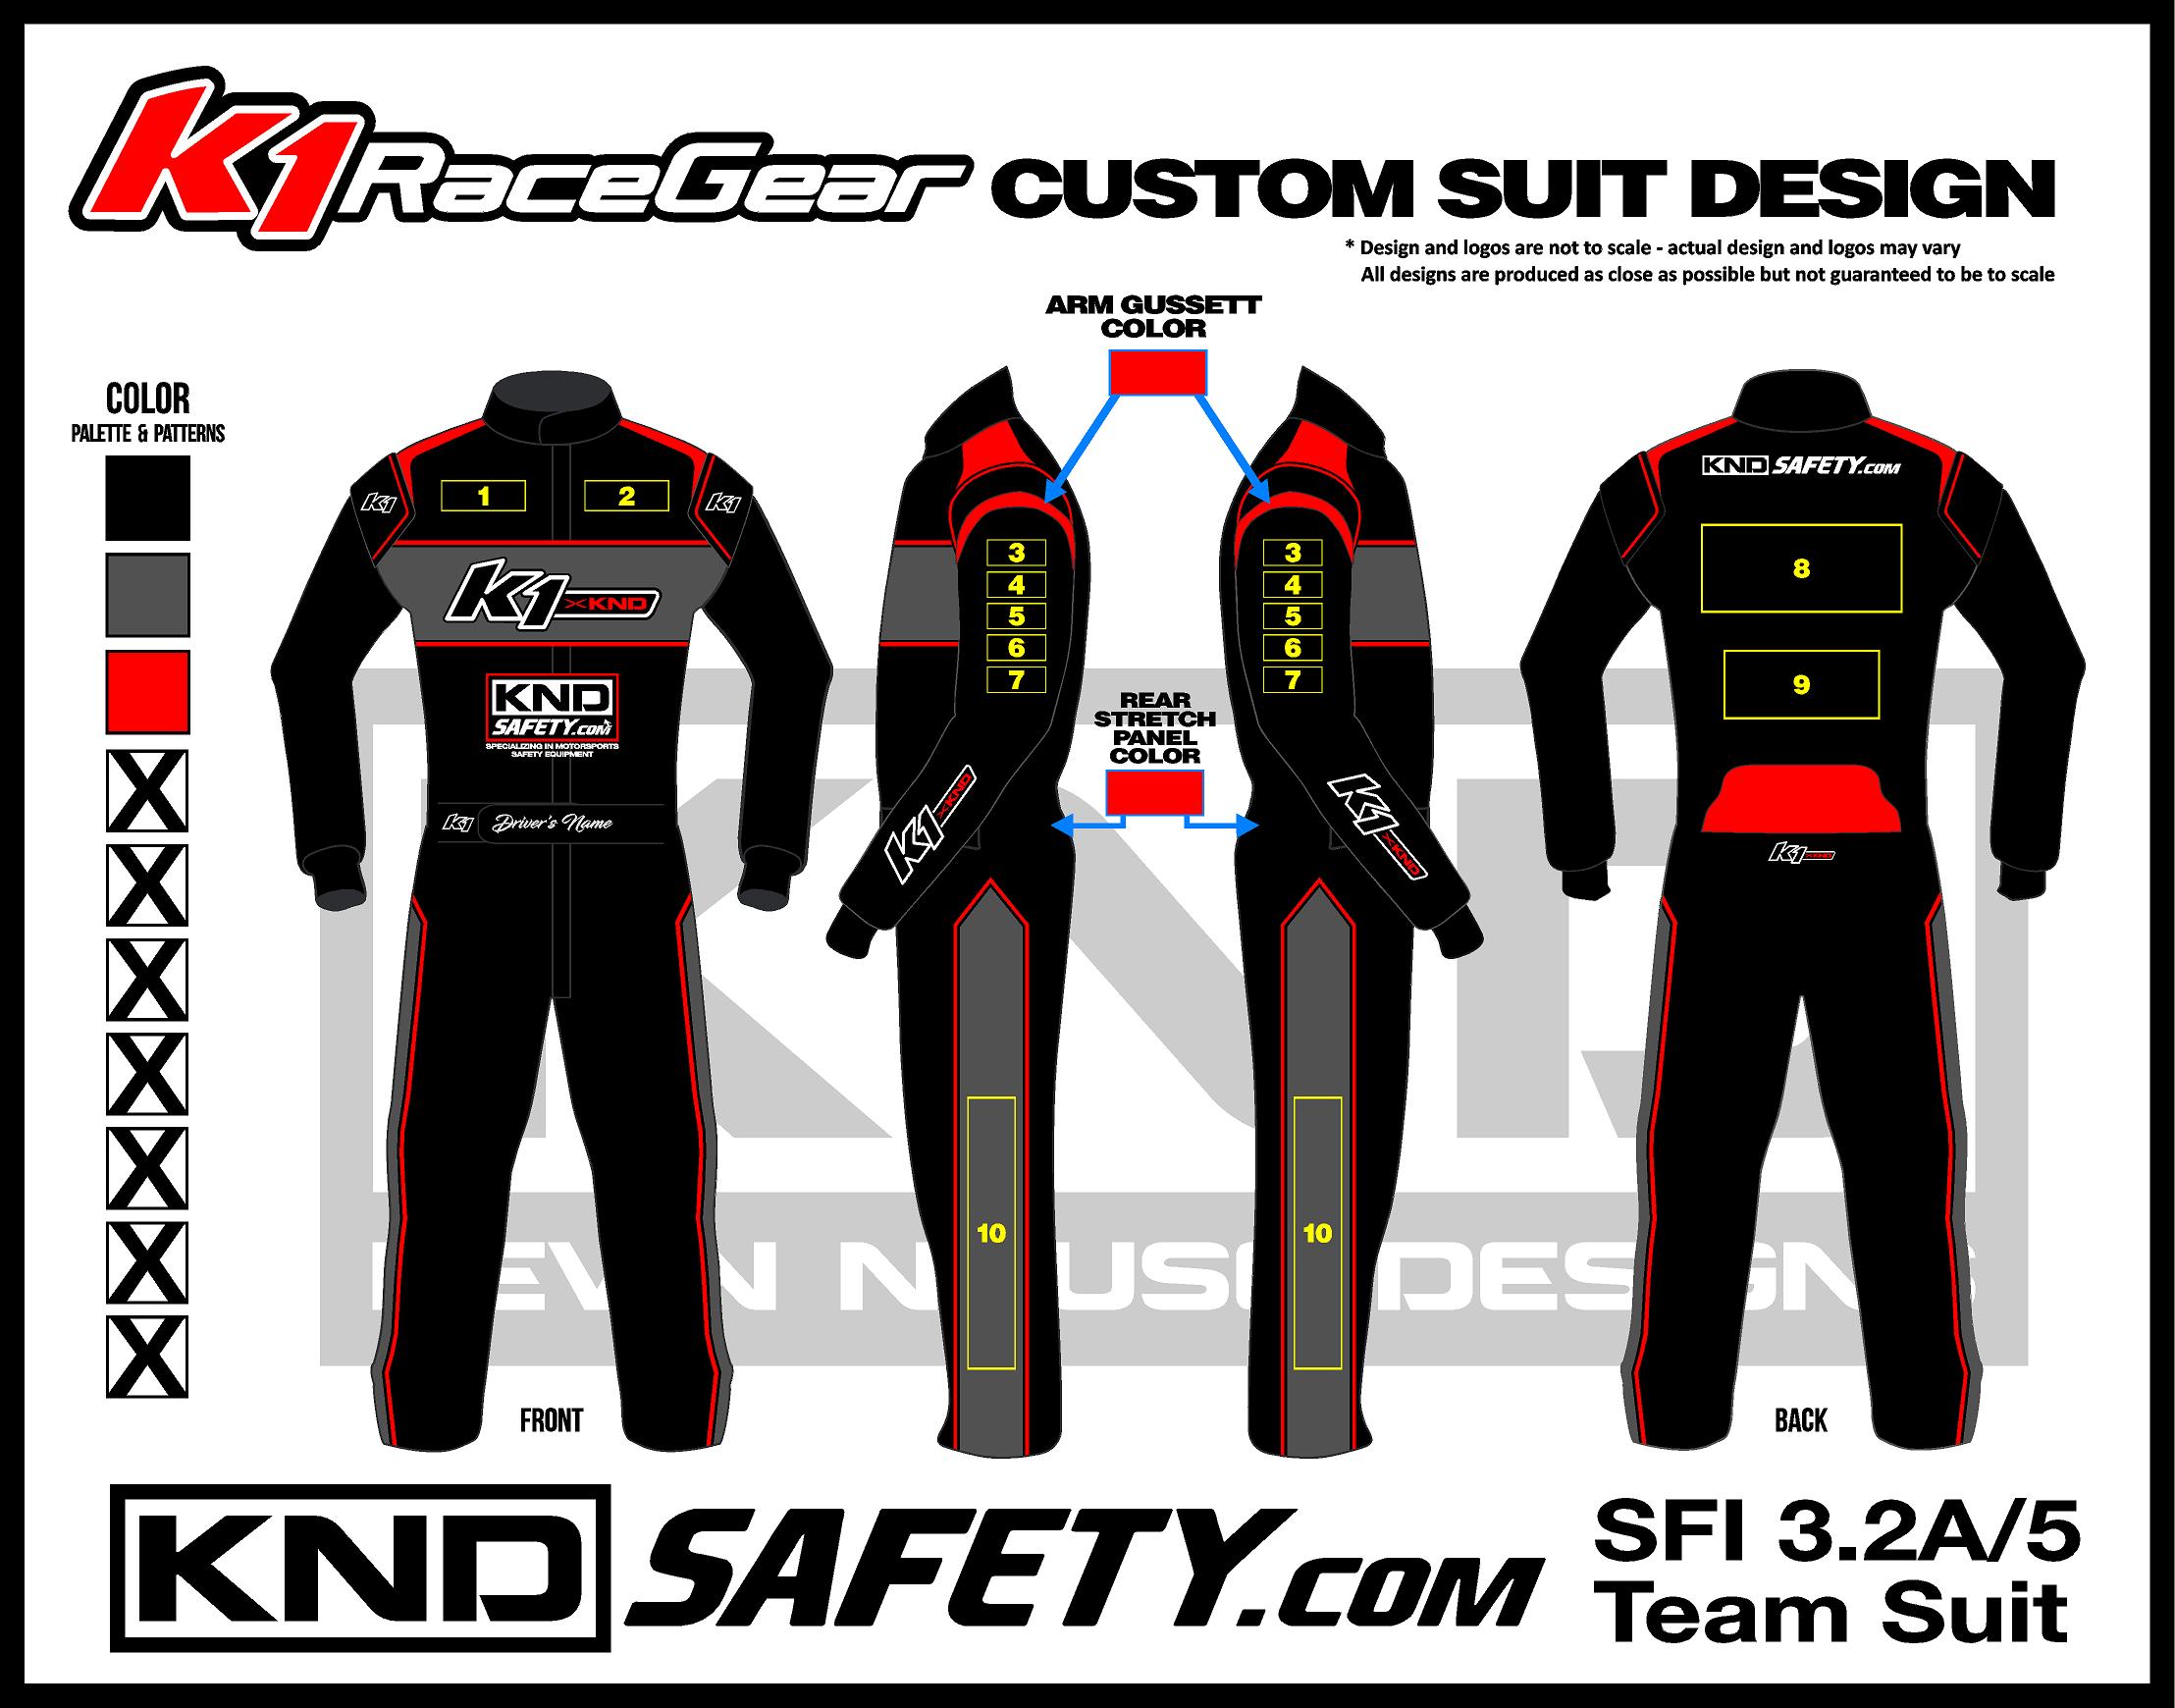 Custom Beginner Auto Racing Suit - Affordable & Safe Entry-Level